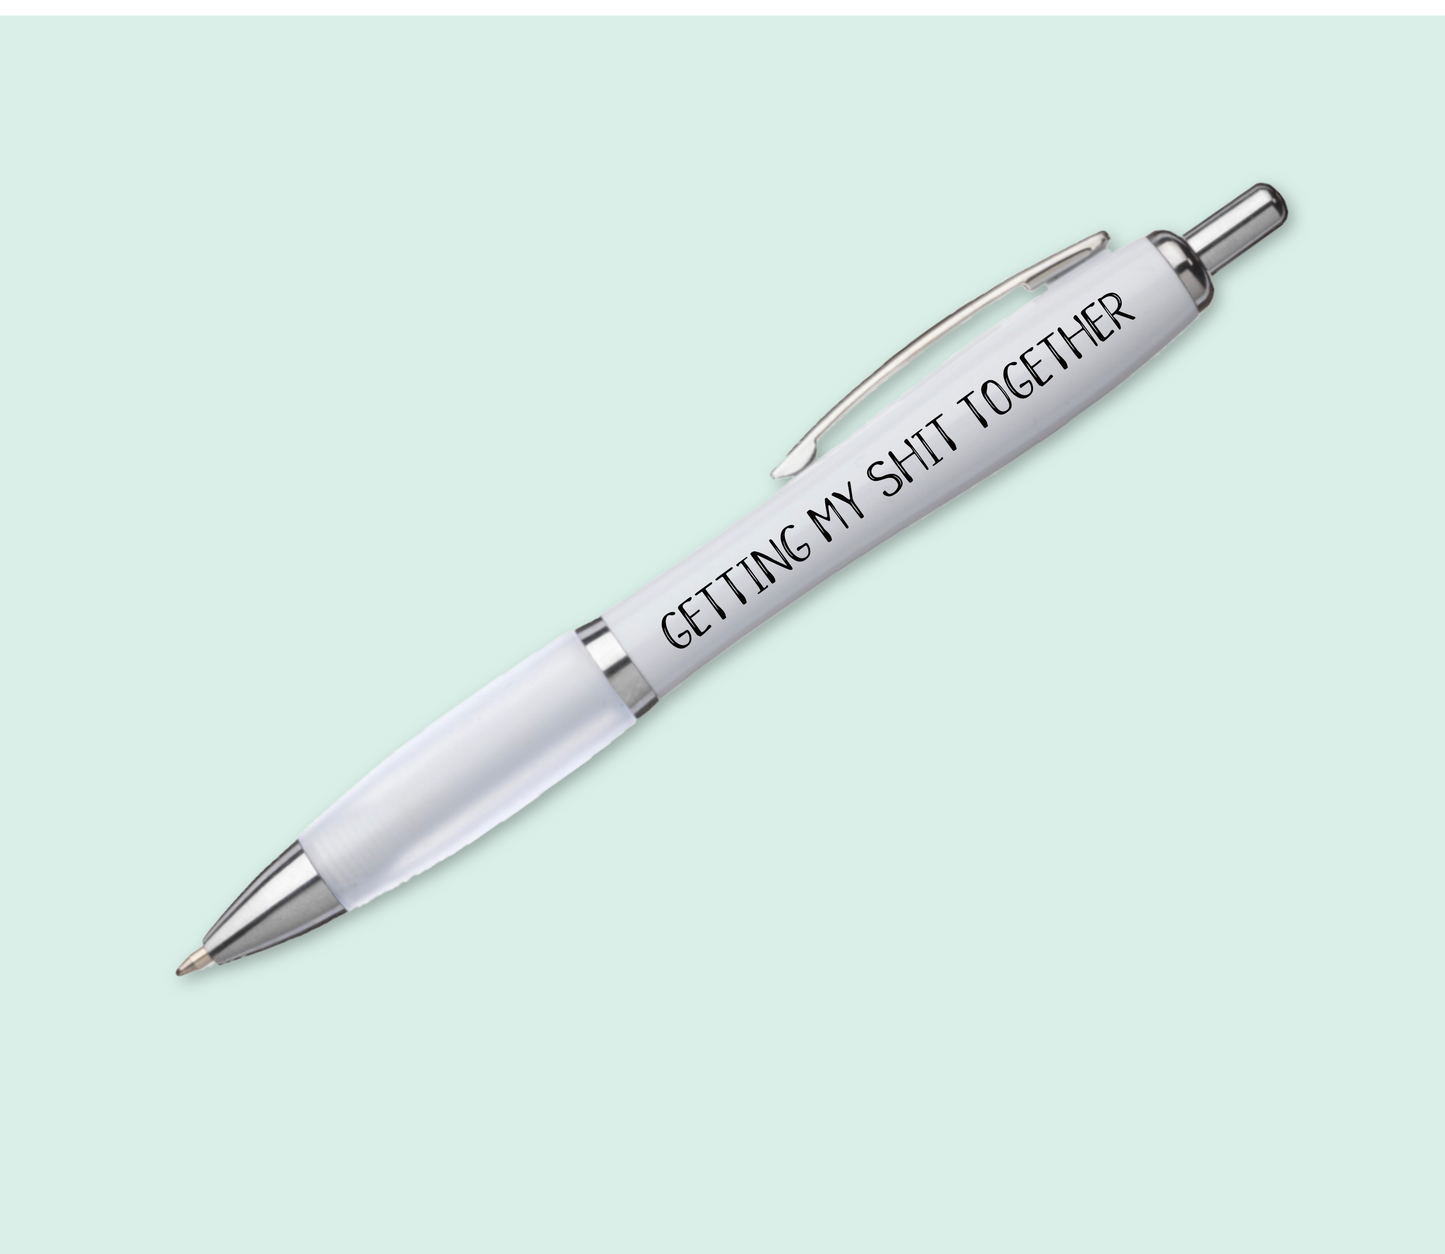 A white pen with silver accents & a white, soft grip barrel. The funny quote 'getting my shit together' is printed to the spine in black ink.